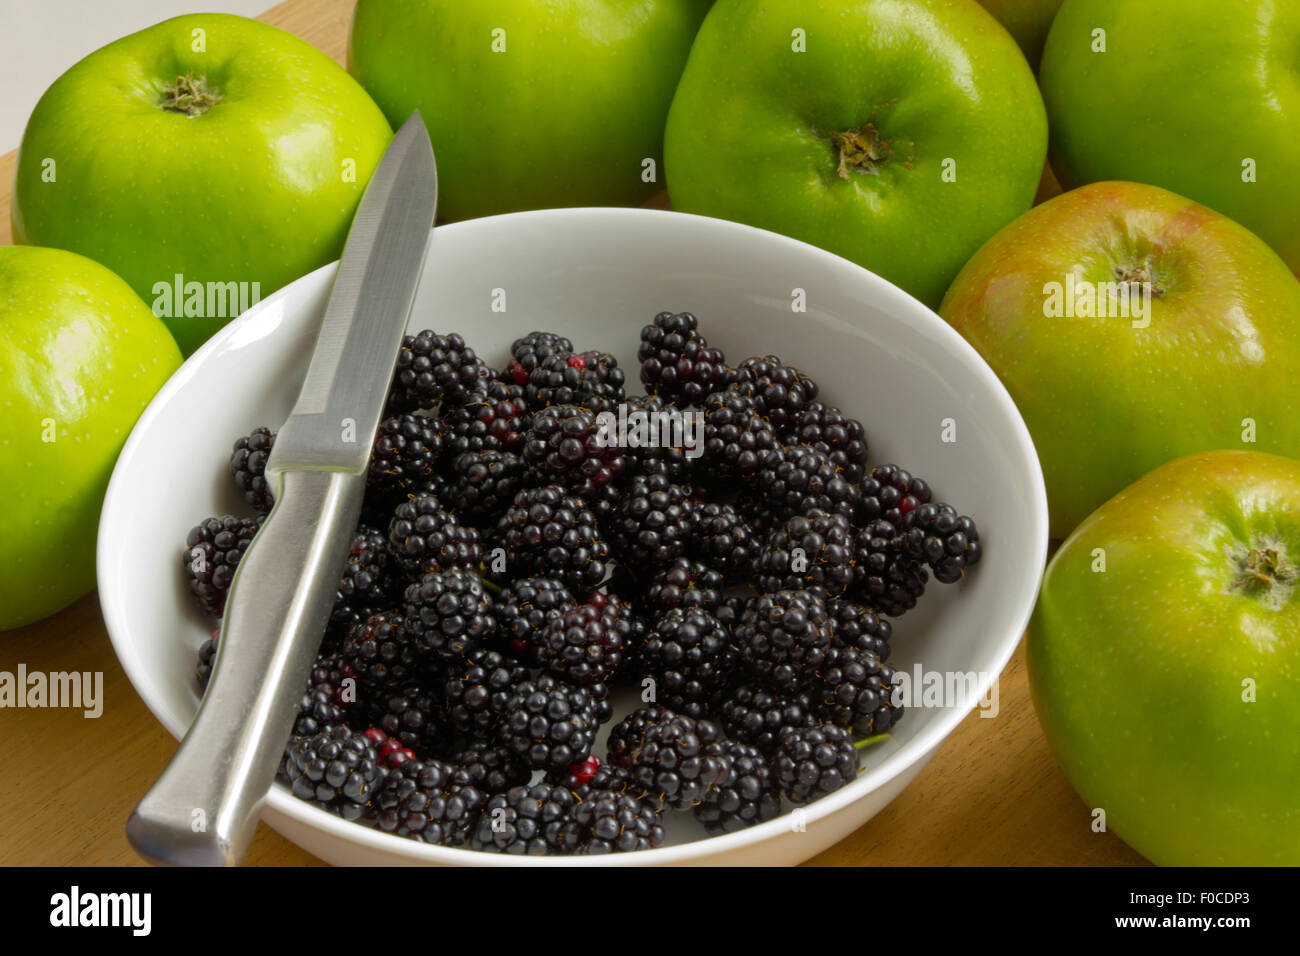 Blackberries in white bowl with knife with Bramley's  Apples surrounding Stock Photo